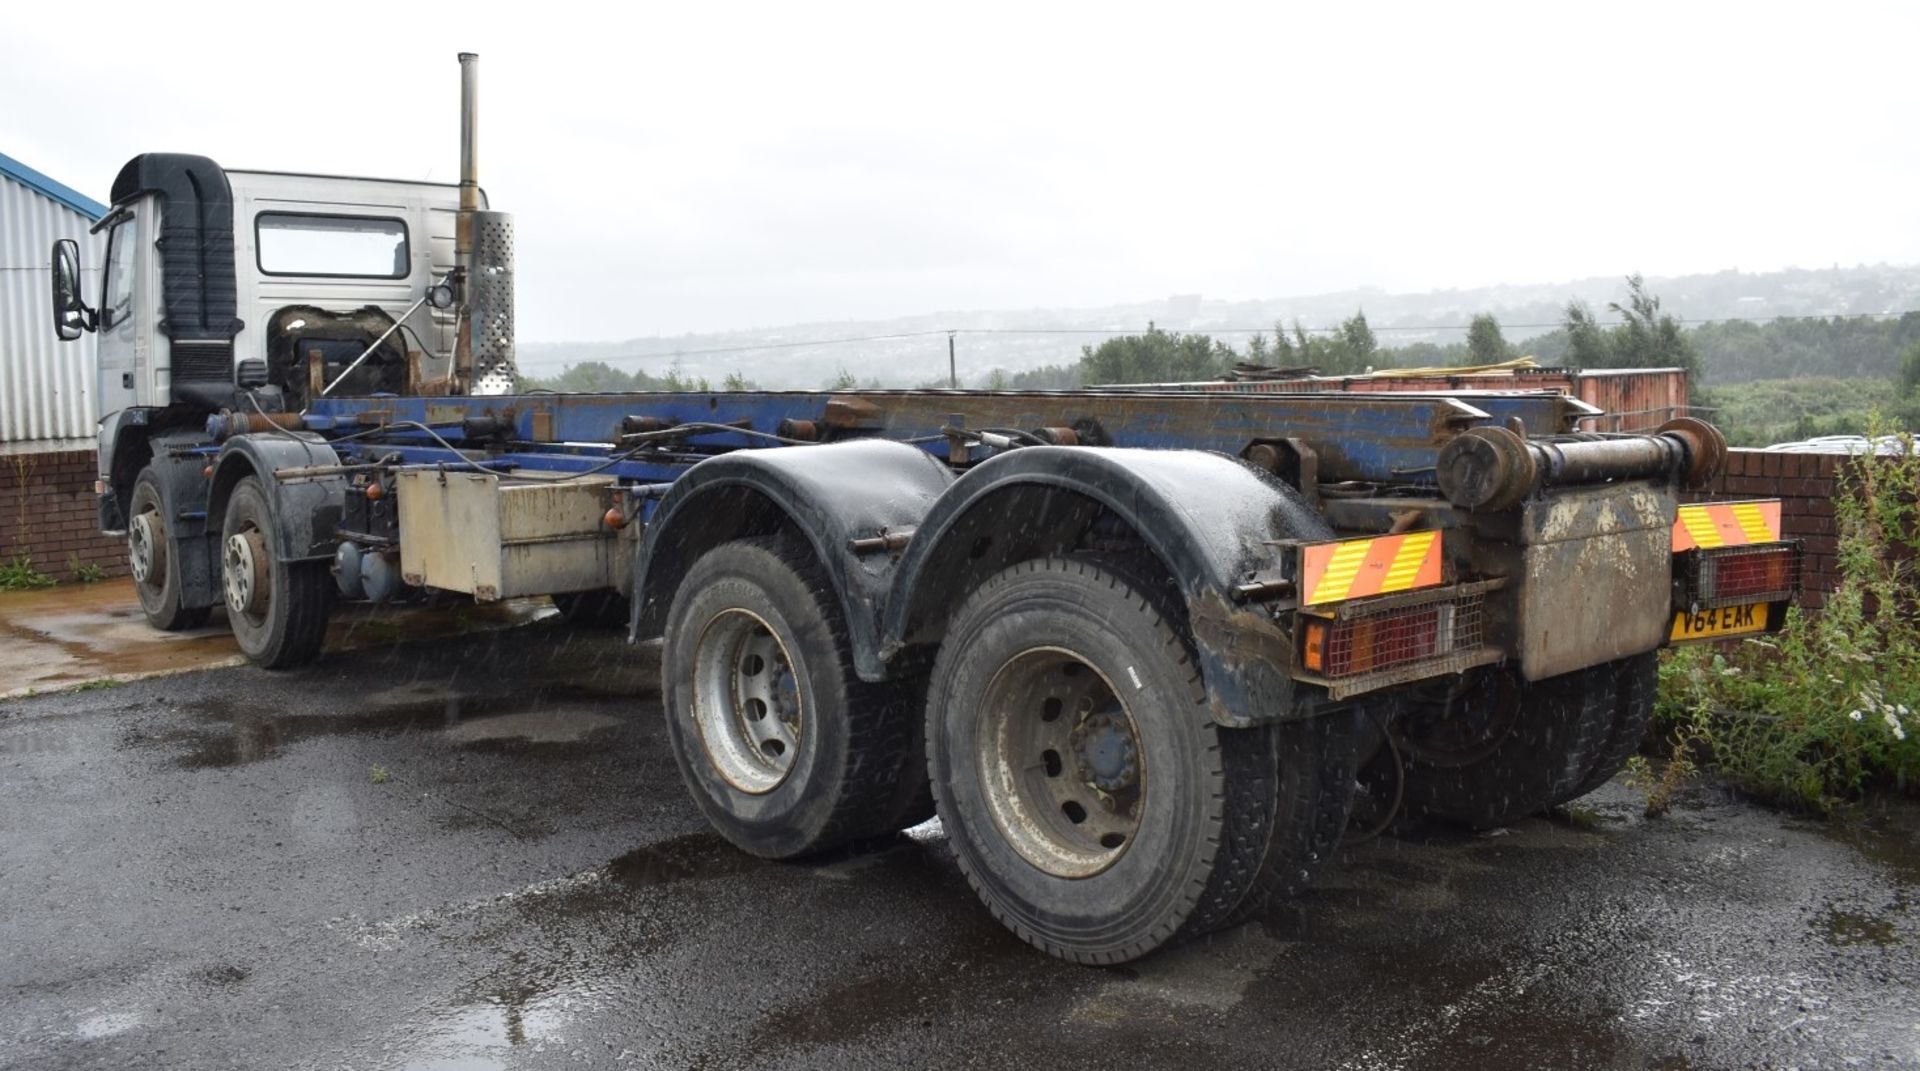 1 x Volvo 340 Plant Lorry With Tipper Chasis and Fitted Winch - CL547 - Location: South Yorkshire. - Image 7 of 25